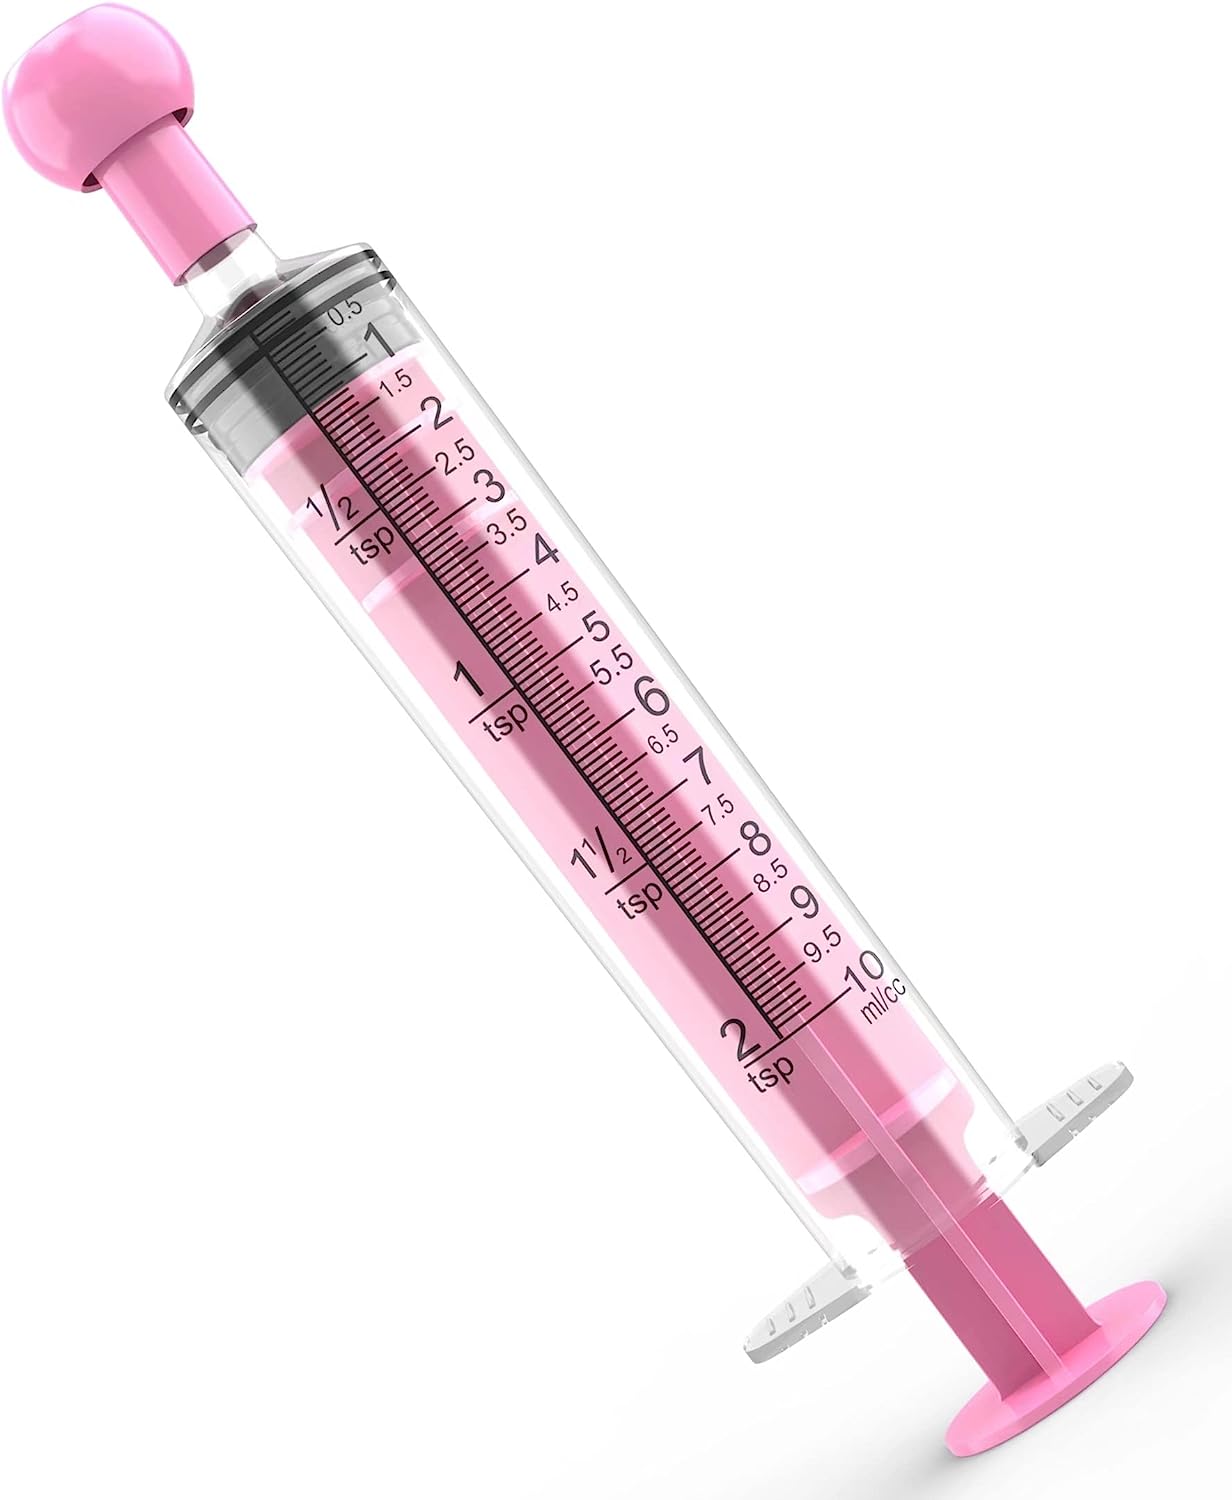 10 Pack 10ml Measurement Syringe with Cap, for Scientific Labs, Liquid Dispensing, Pet and Party Supplies(Pink)